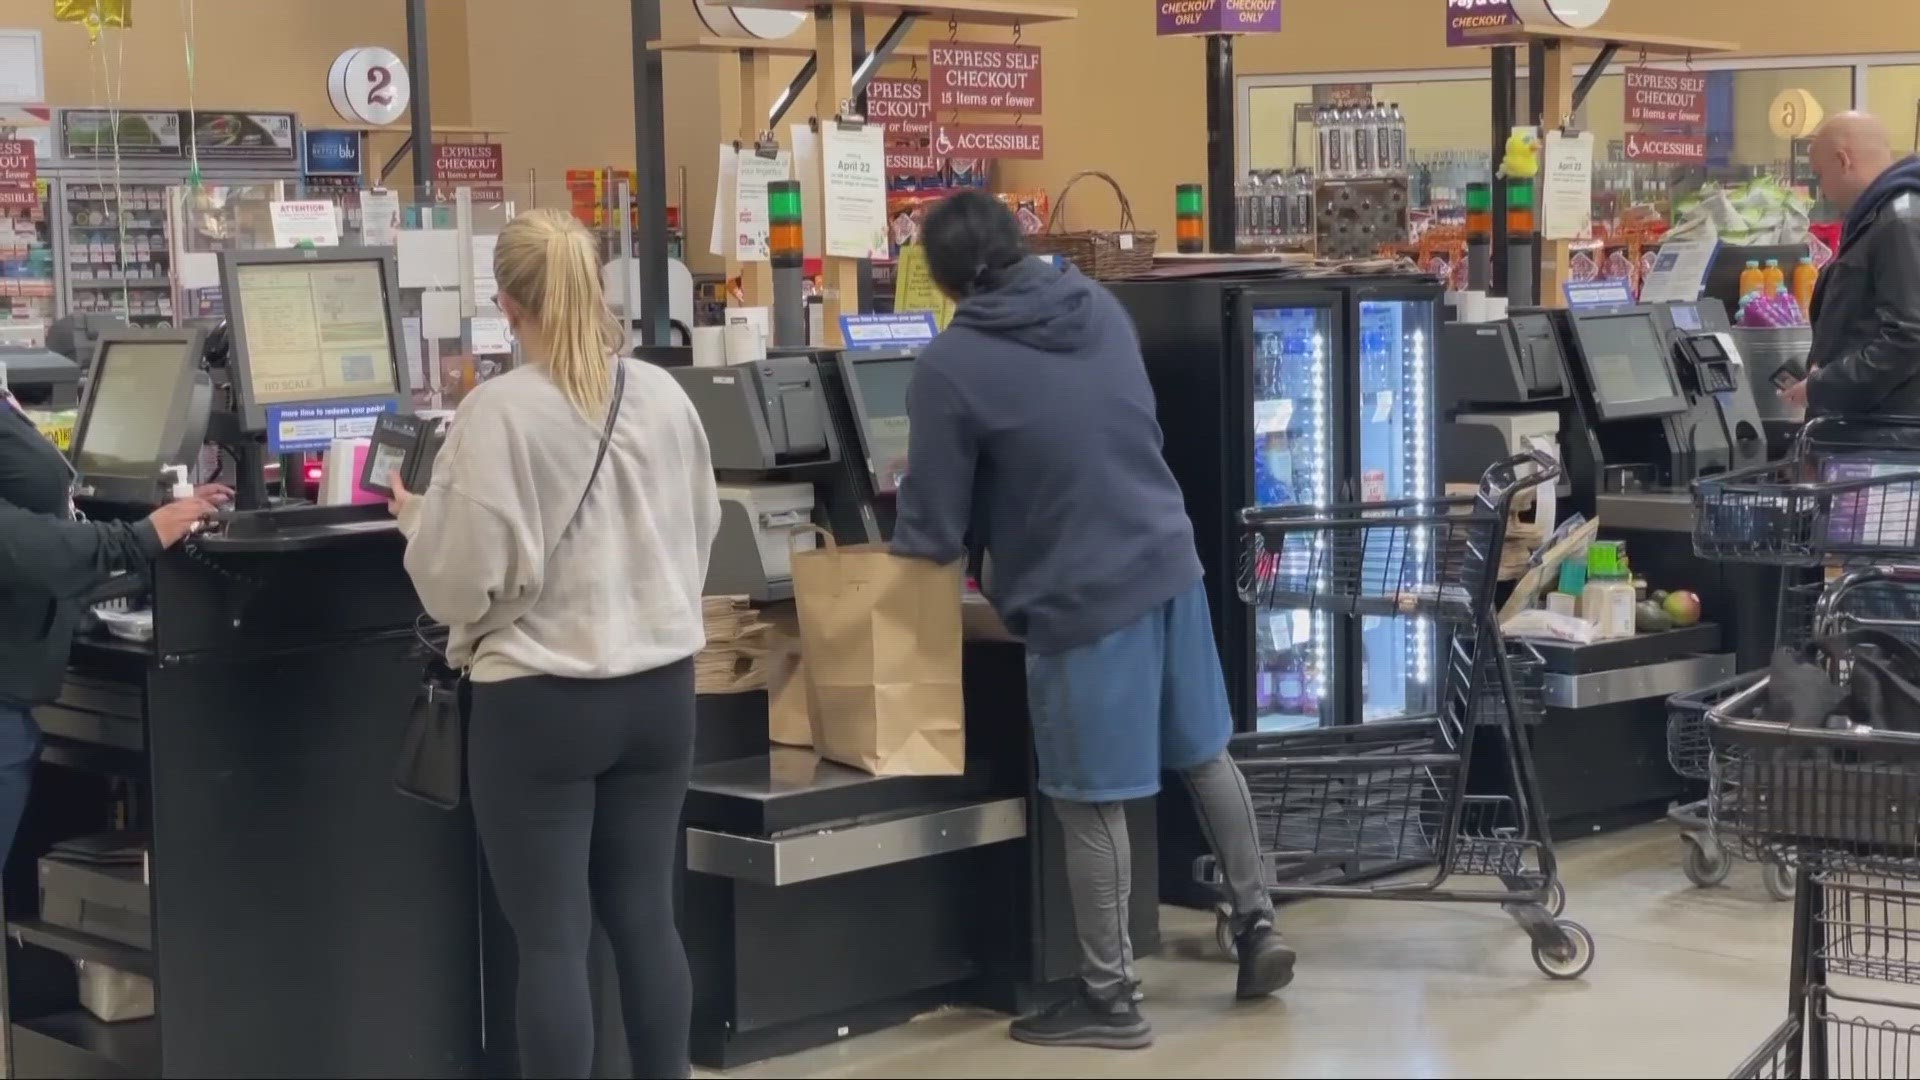 Starting today, Giant Eagle customers will no longer be charged for paper shopping bags.